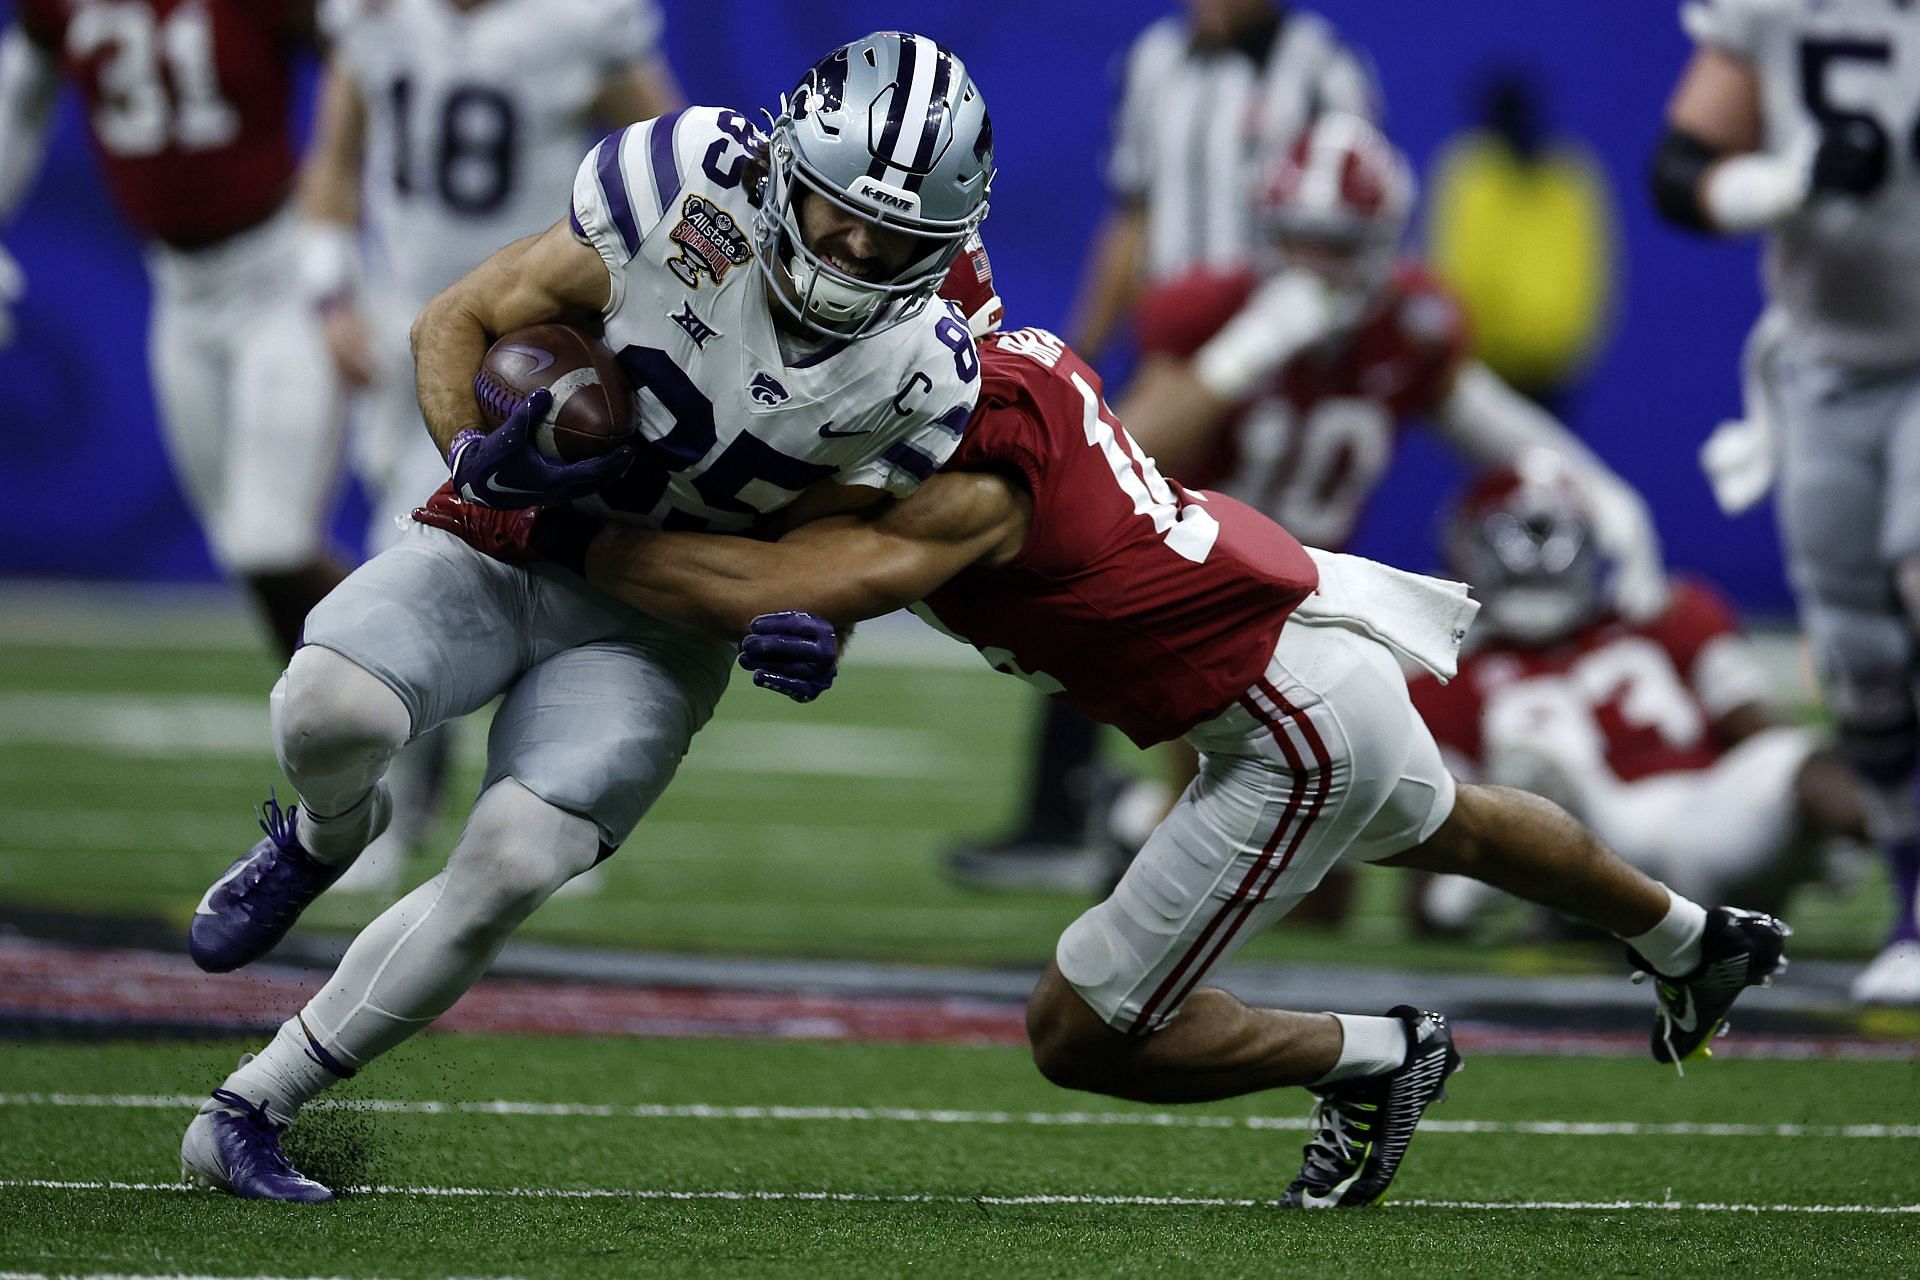 Will Swanson #83 of the Kansas State Wildcats is tackled by Brian Branch #14 of the Alabama Crimson Tide 